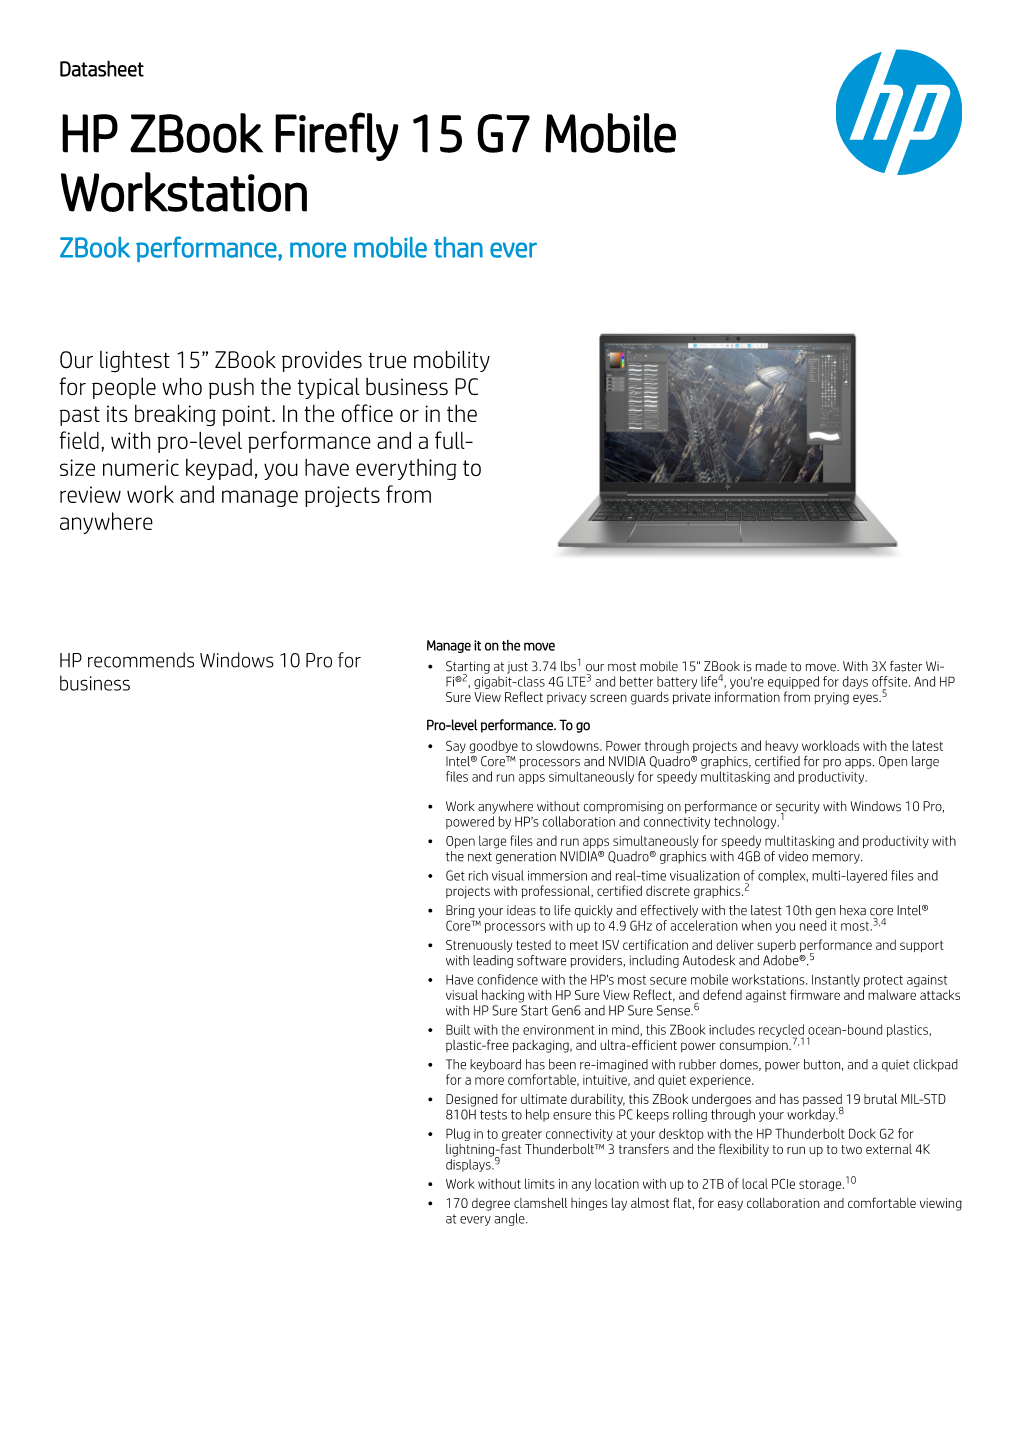 HP Zbook Firefly 15 G7 Mobile Workstation Zbook Performance, More Mobile Than Ever